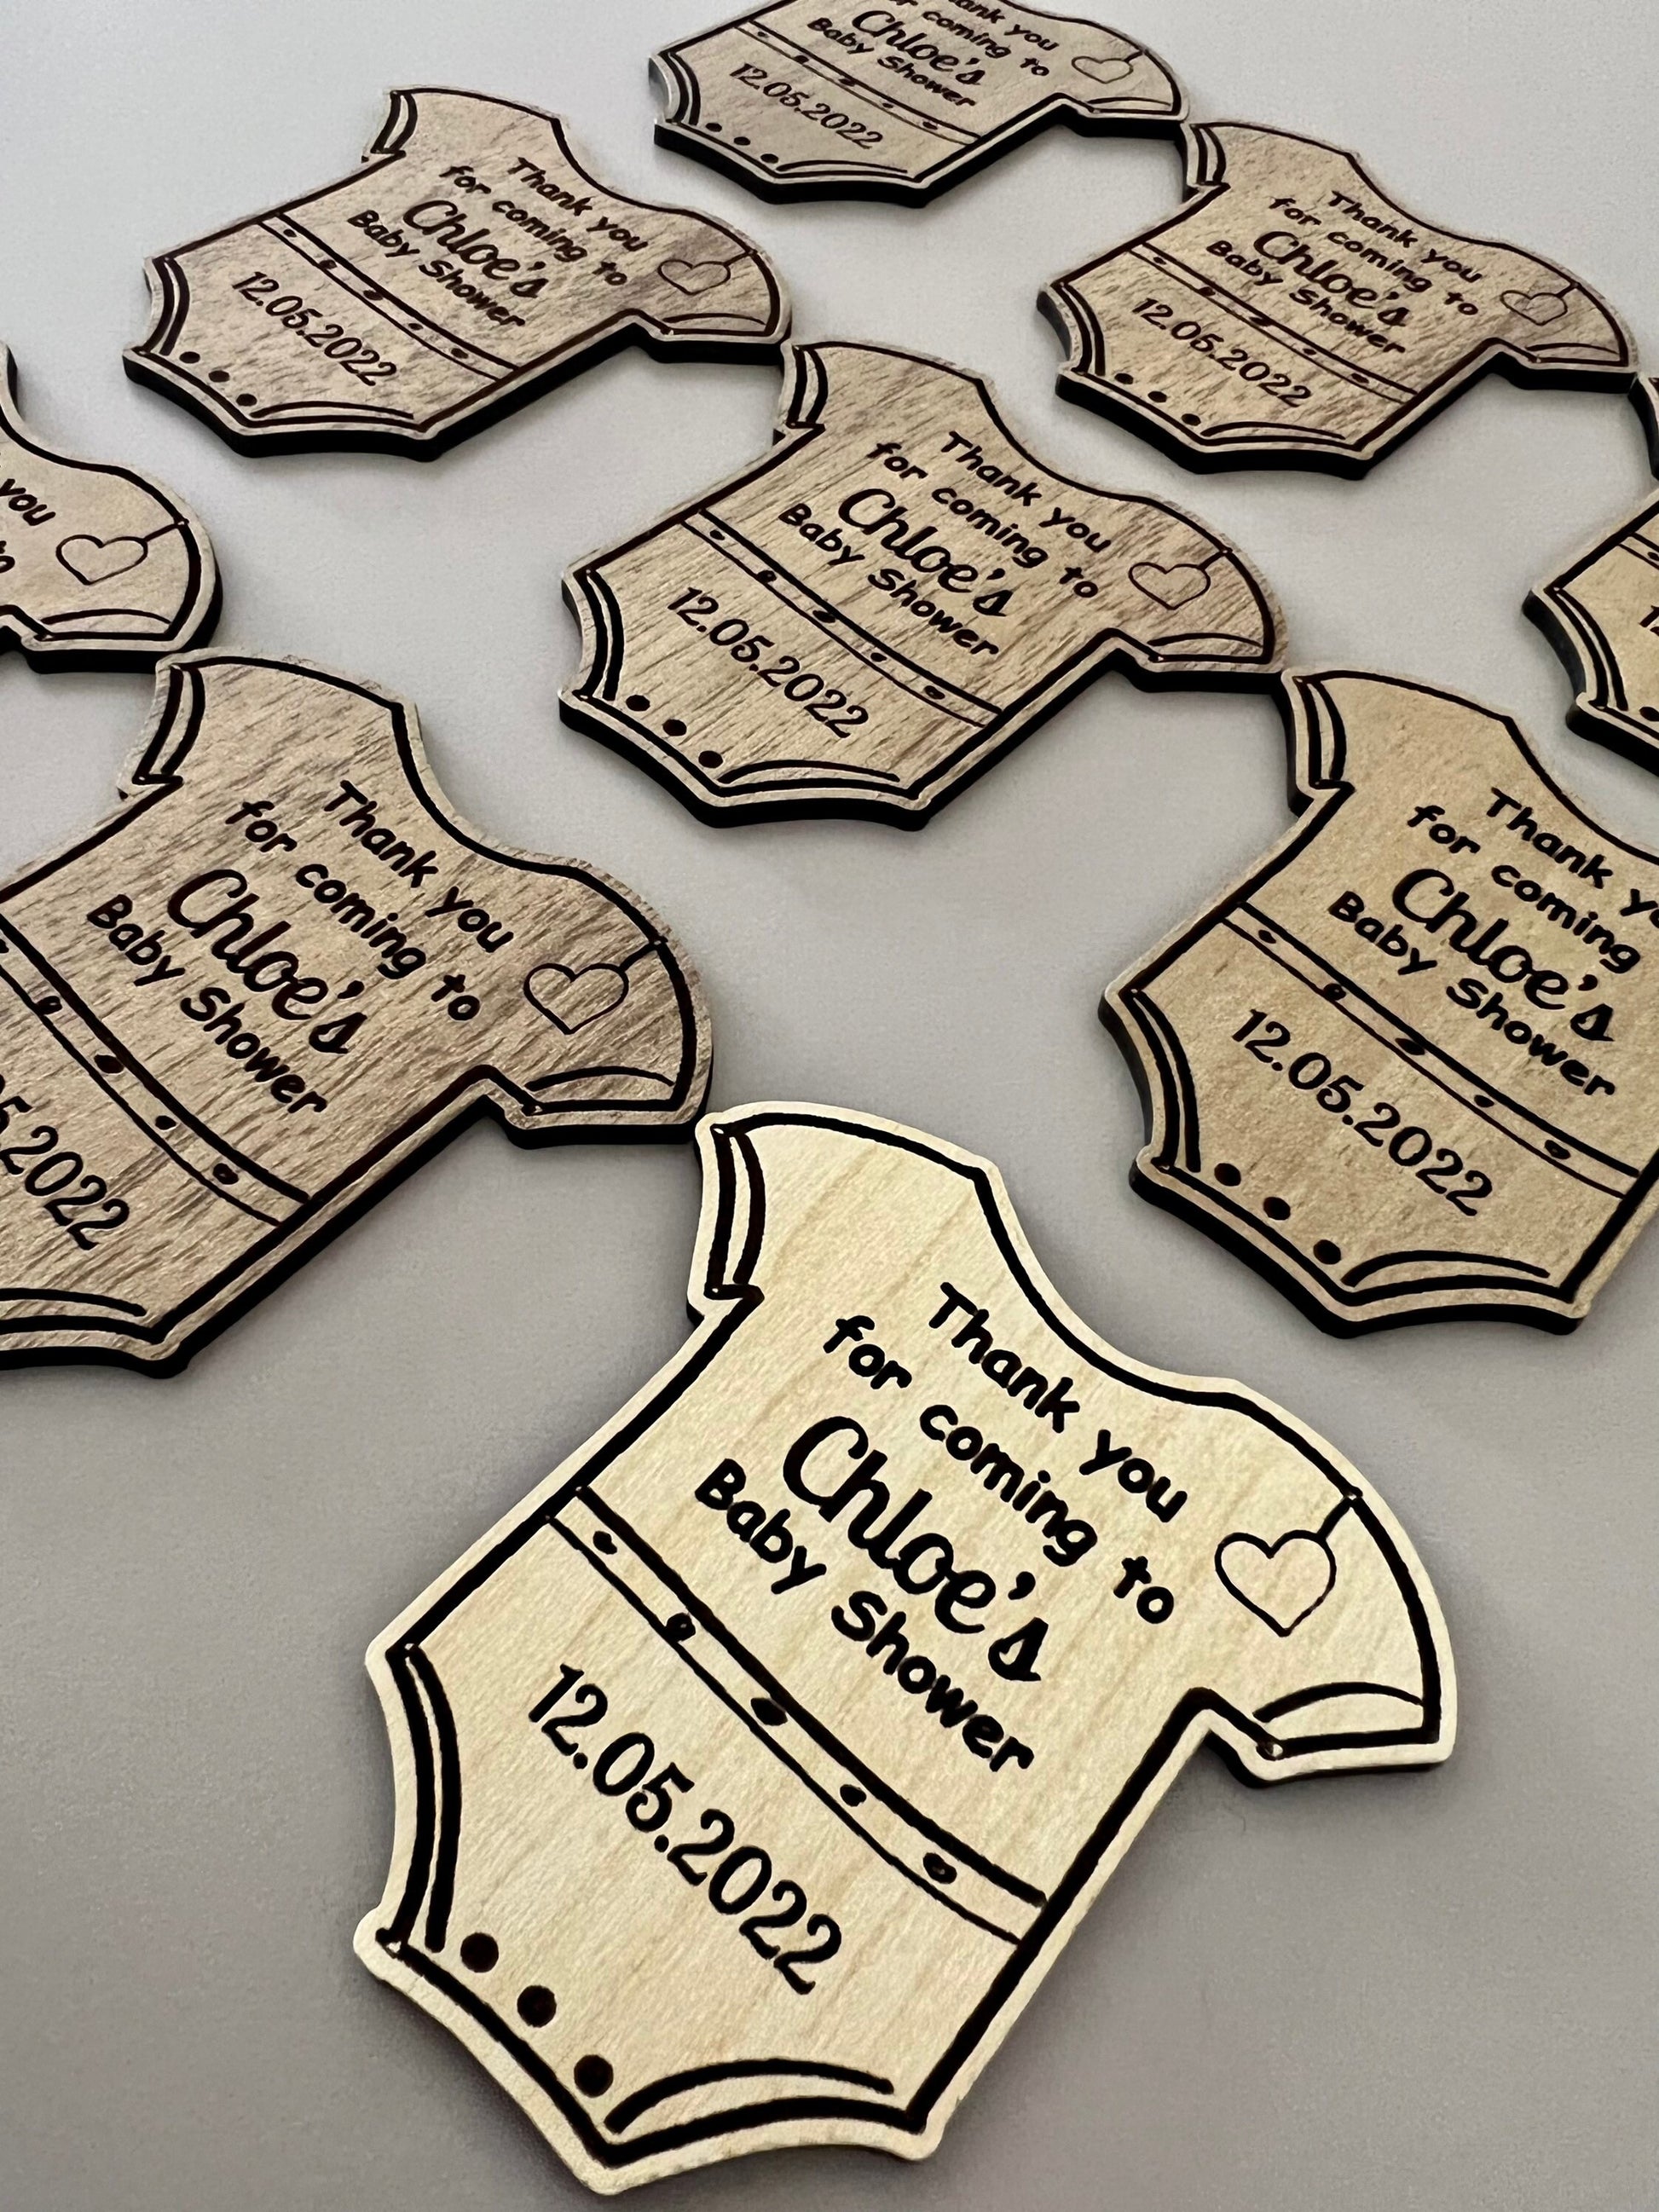 Baby Body Suit Magnets for Baby Shower | Baby Shower Favors in Bulk | Party favors | Tiny Baby Shower Favors for Guests